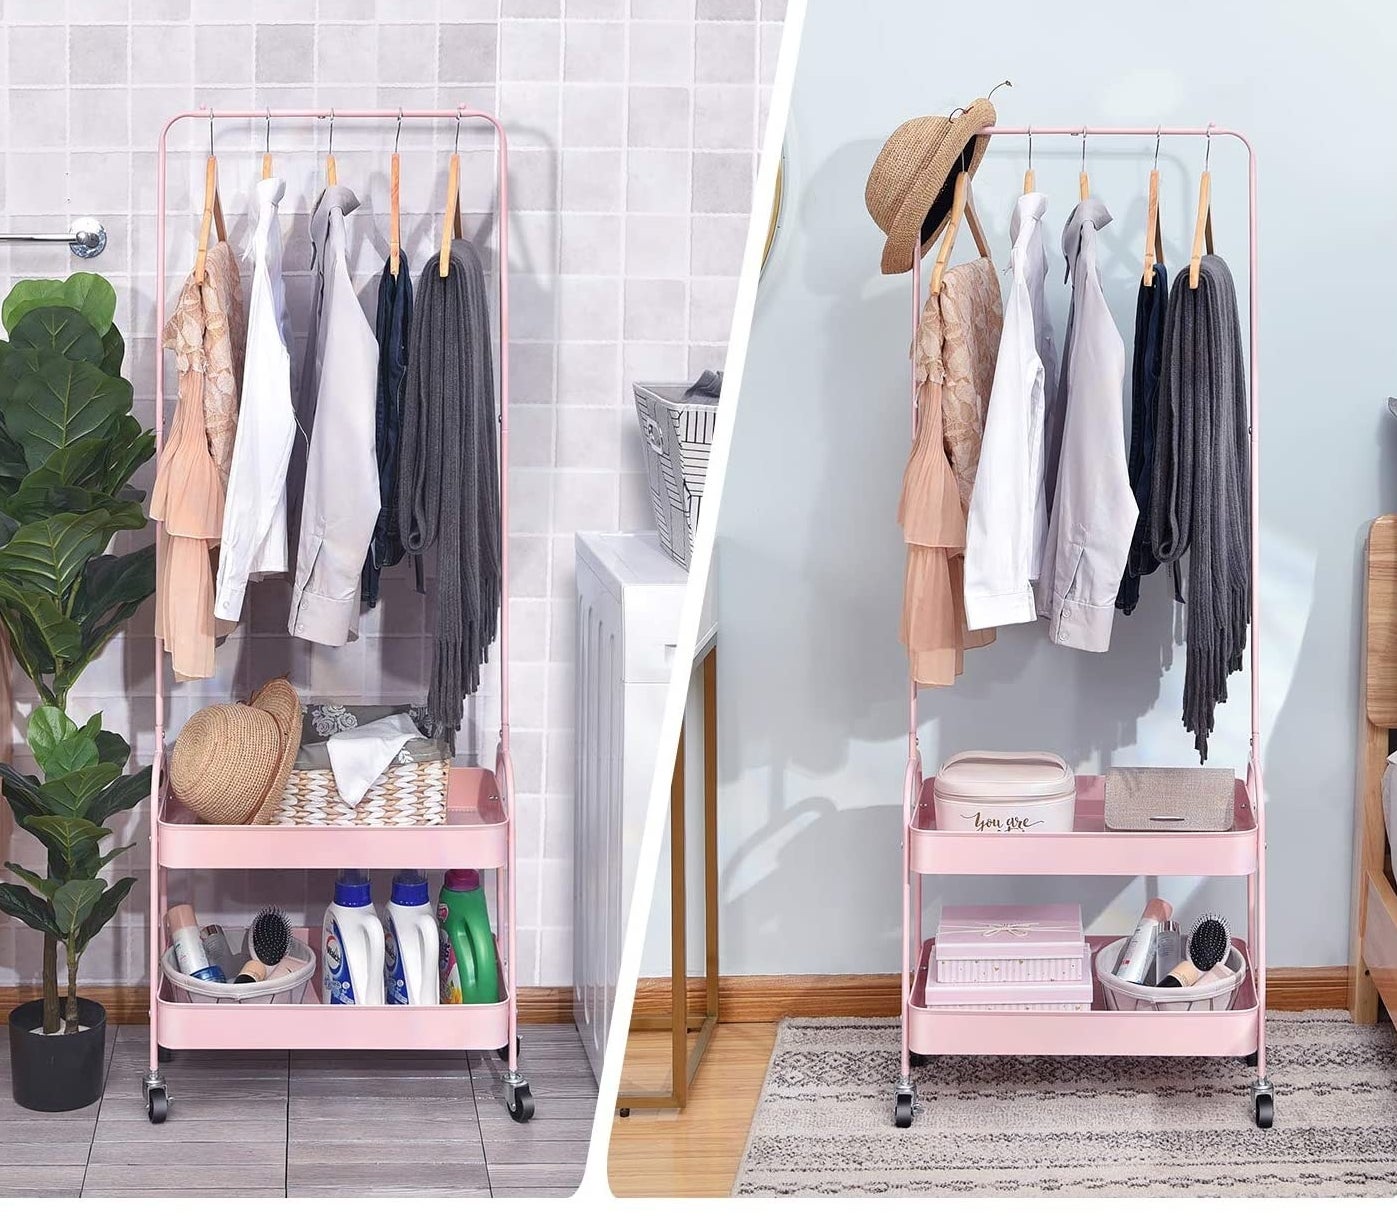 The garment cart being used in a bathroom and in a bedroom